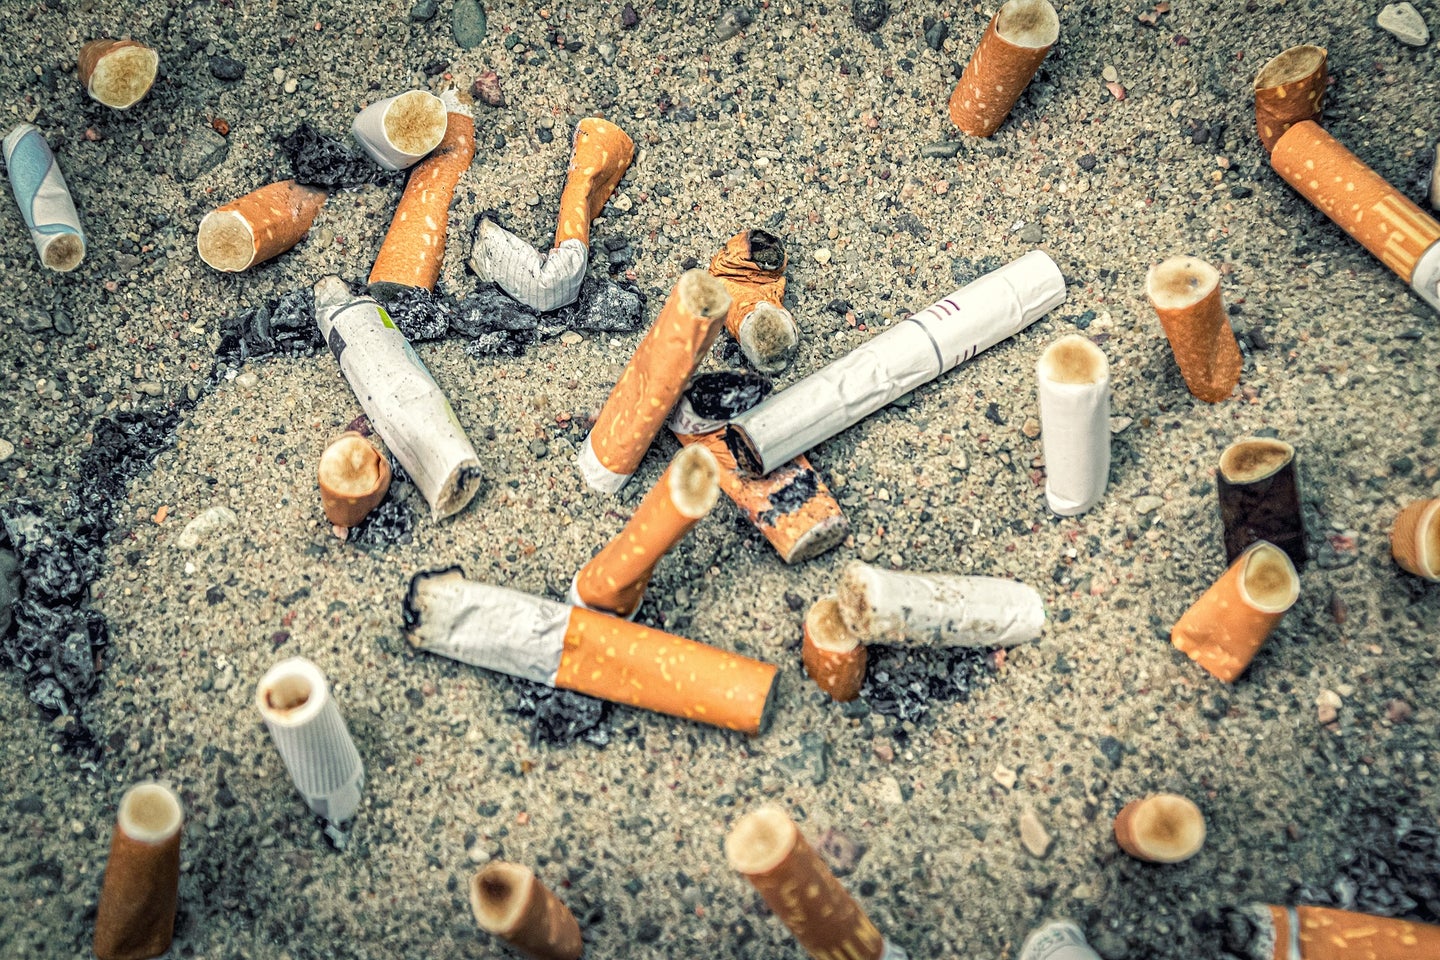 A new report estimates that 65 percent of cigarettes are littered in the US.